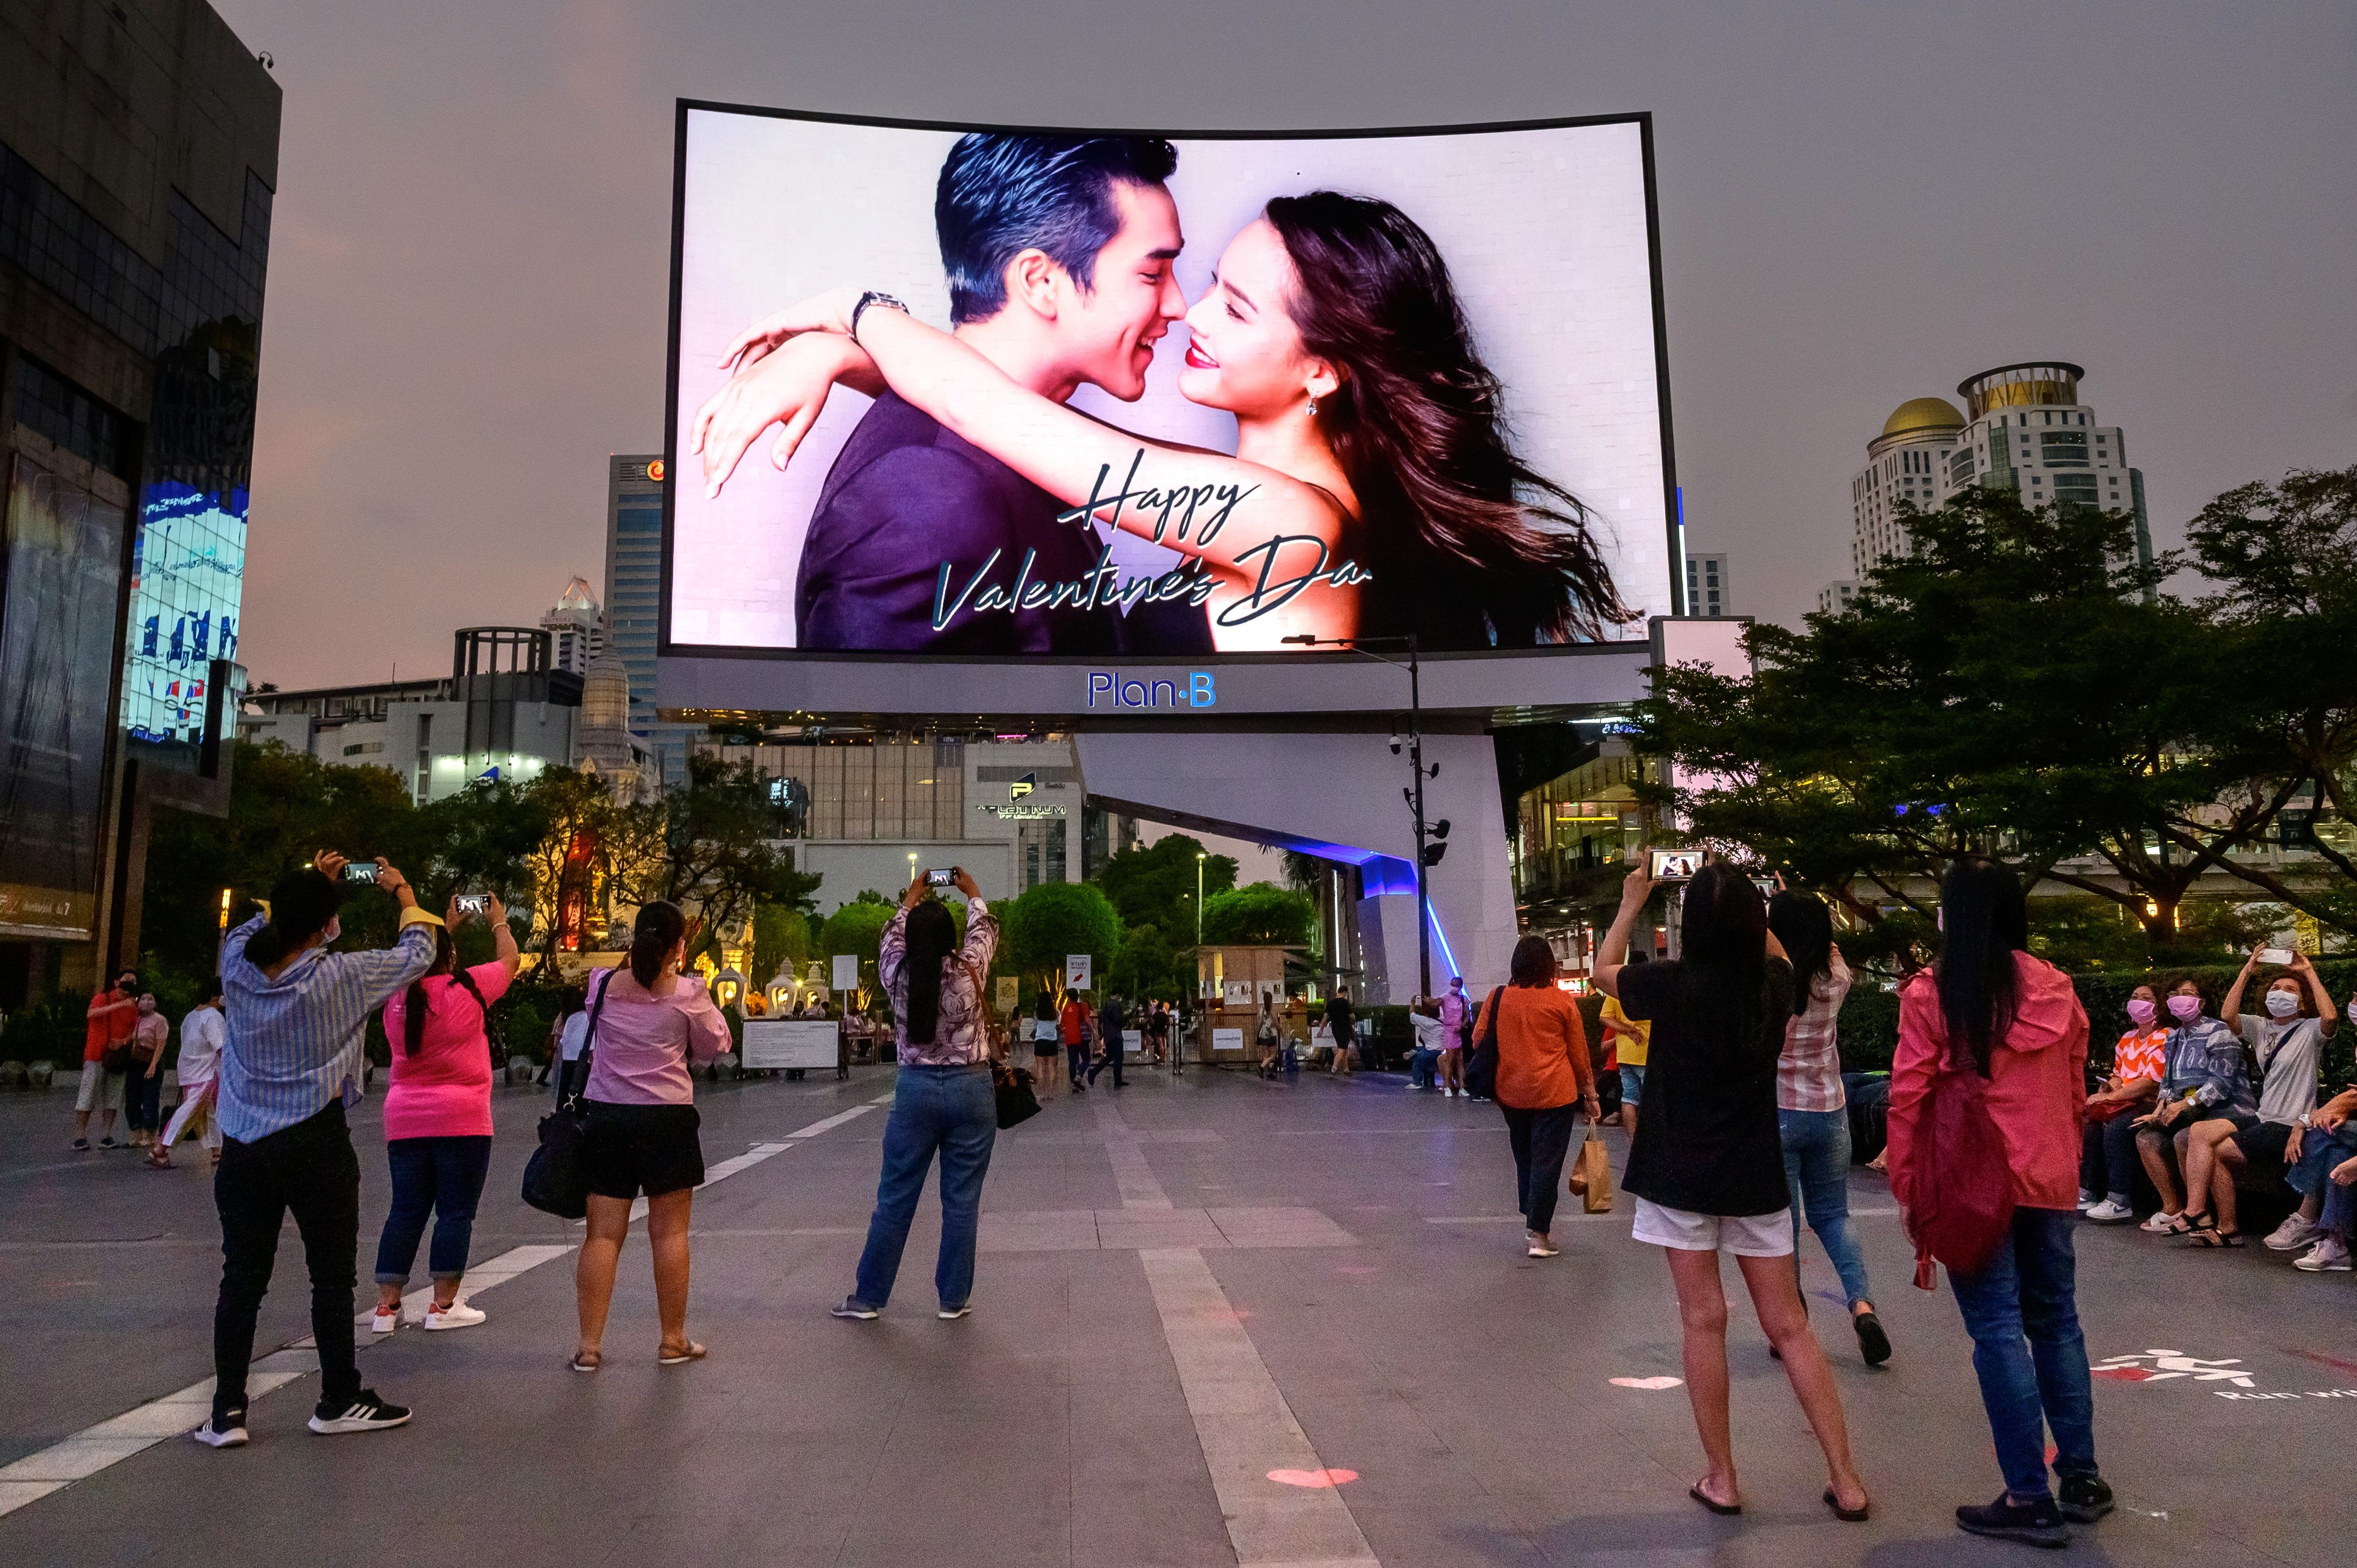 People take photographs of a screen wishing a happy Valentine’s day, in Bangkok on 14 February 2021